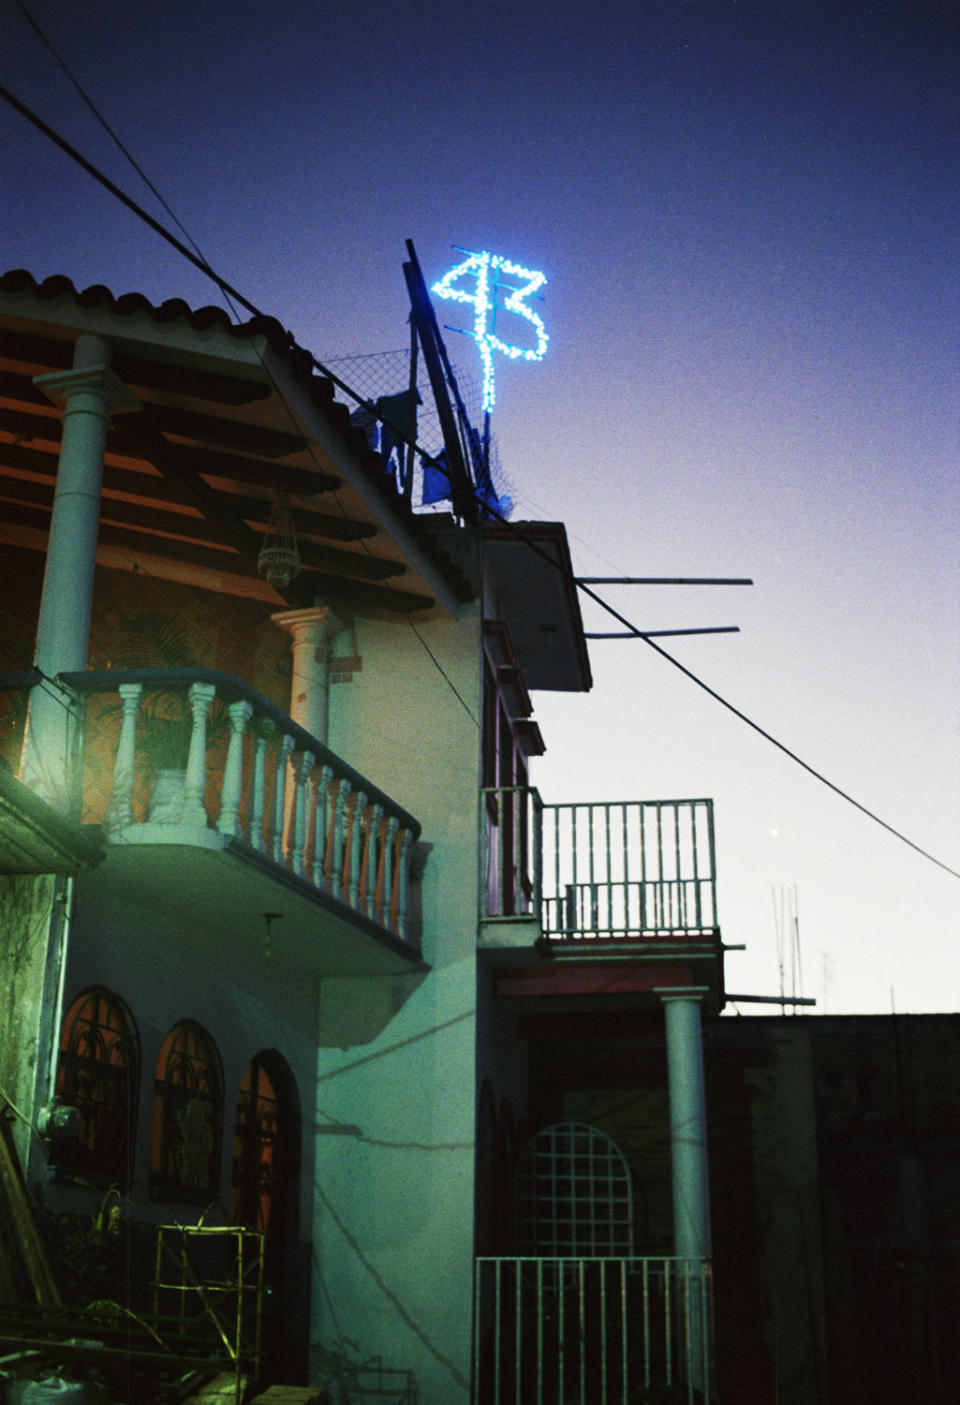 The number "43" lights up a family's rooftop in Tixtla, Guerrero, on Feb. 1, 2015. Tixtla is home to the Ayotzinapa Normal School and 14 of its missing students.